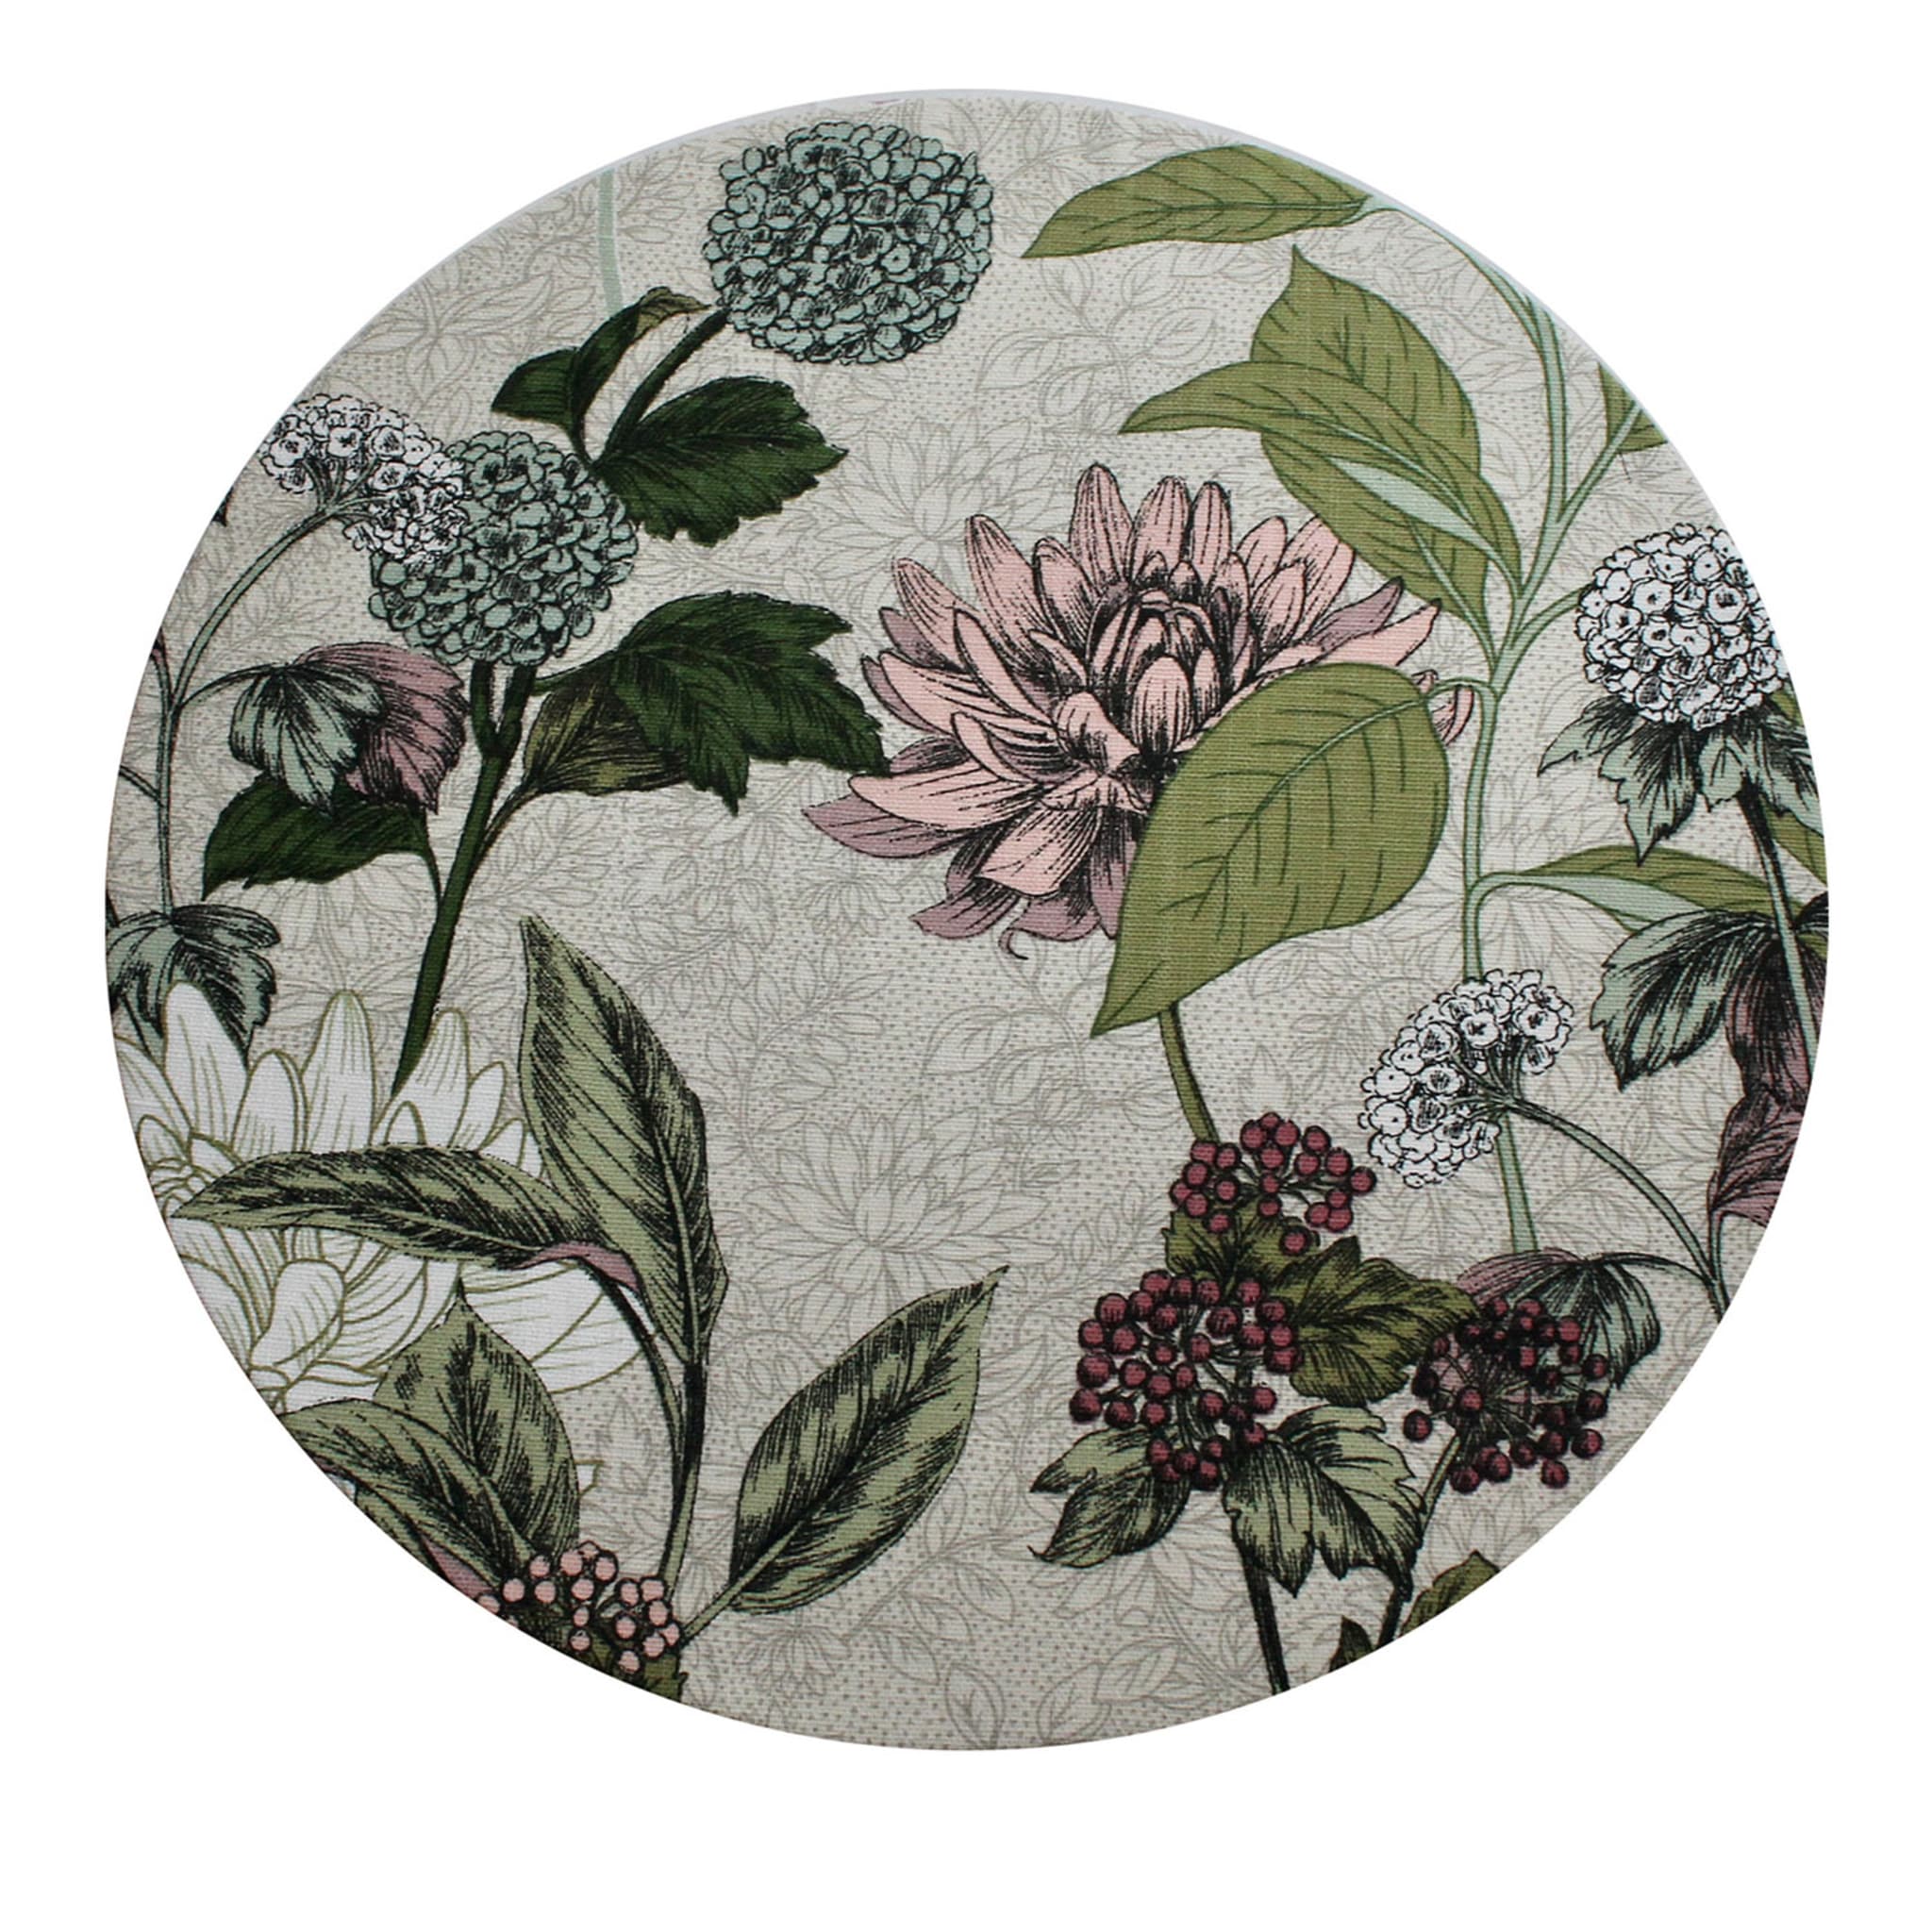 Cuffiette Flowers Round Polychrome Placemat #2 - Main view